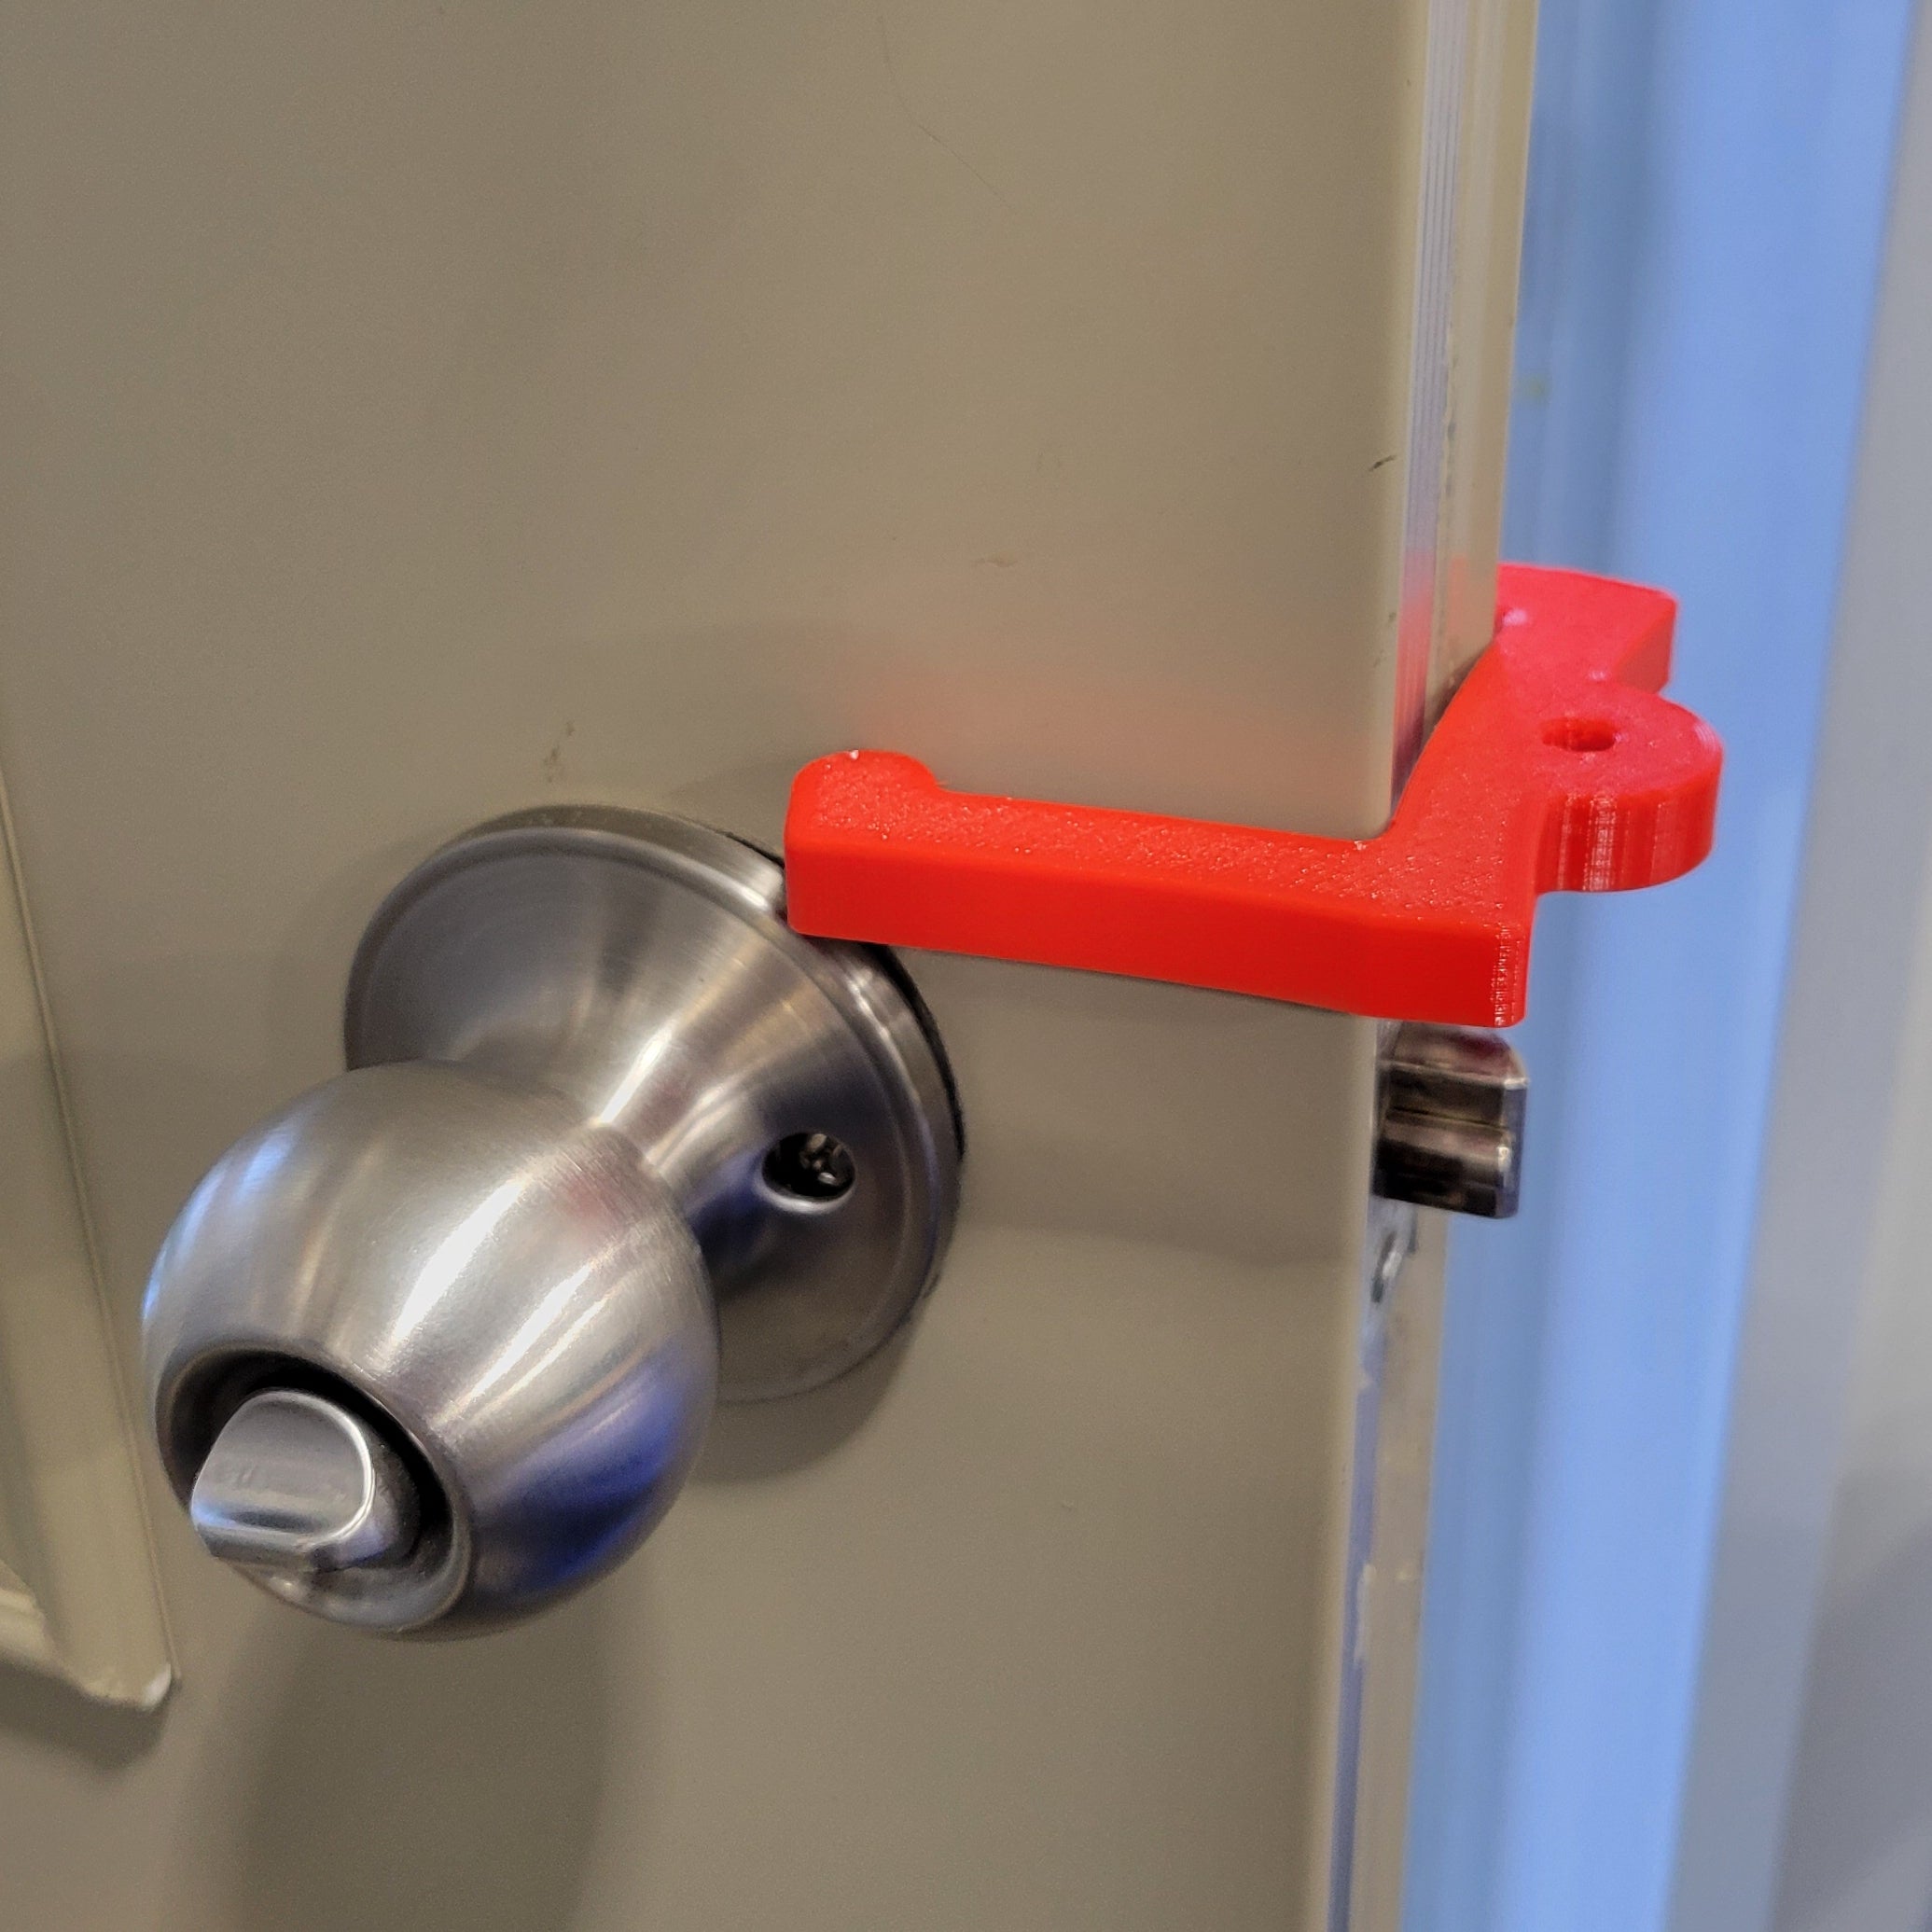 Our 3D-printed Door Check, (sometimes referred to as a Door Stop or Door Jam) is designed to allow any user to keep any door from 1" to 2" thick open by way of friction applied from the flexible nature of the door. The Door Check will also work with thinned doors that have a hinge accessible for Door Check placement.